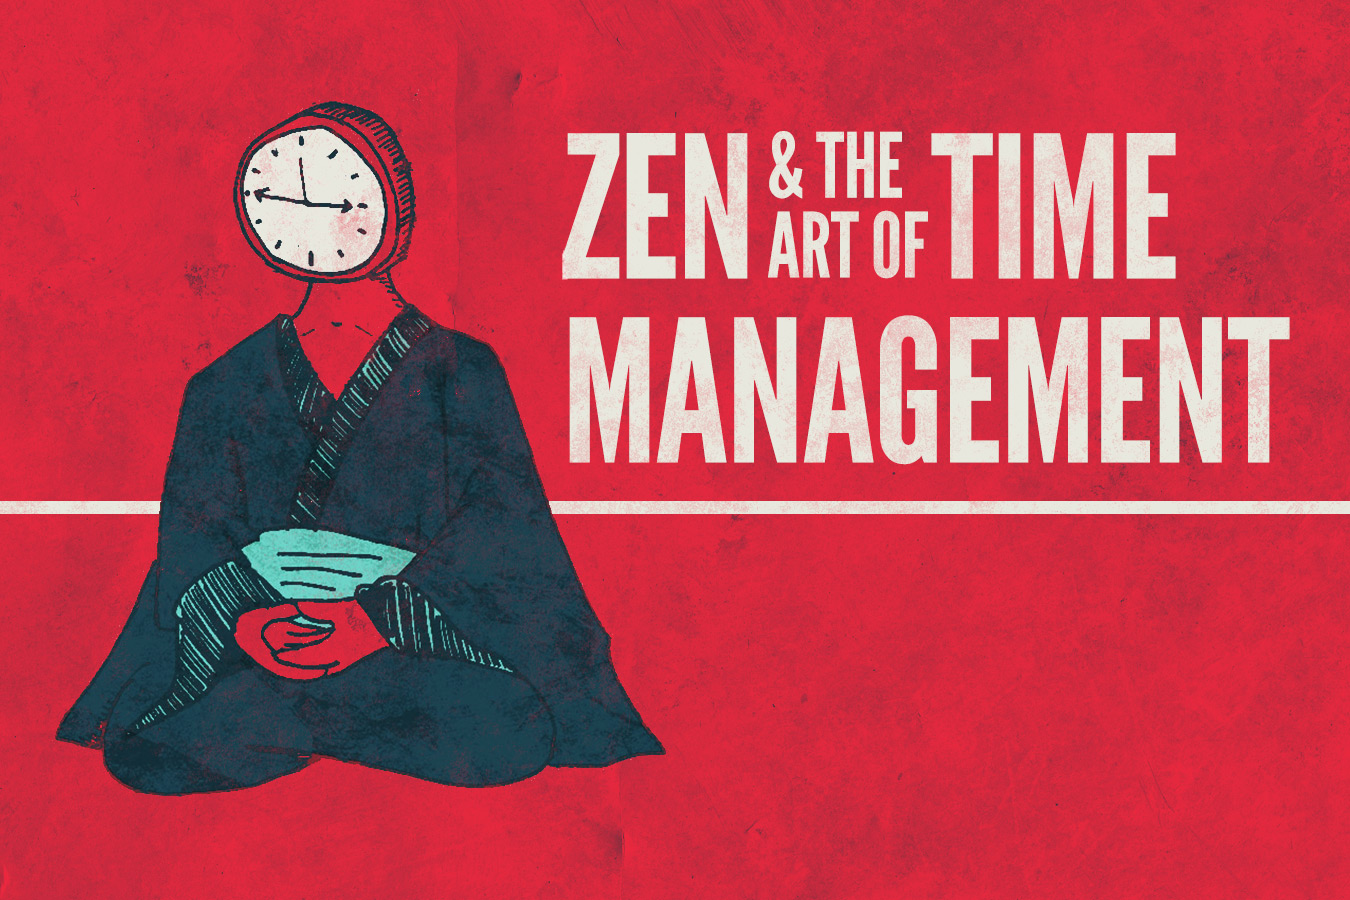 Zen and the Art of Time Management